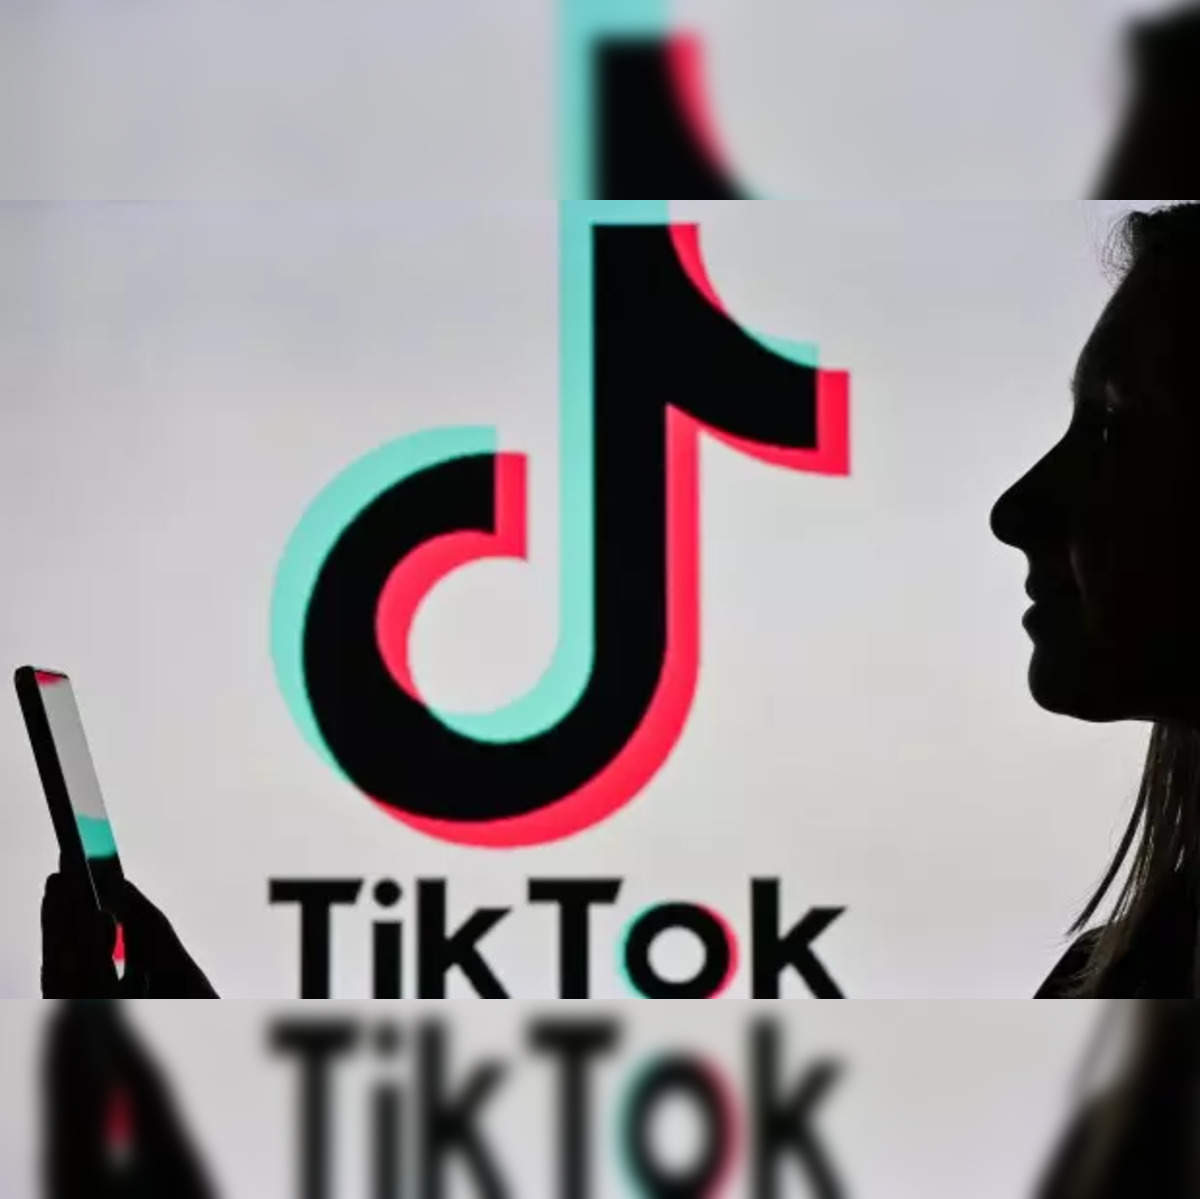 FAQ: Should you delete TikTok? Here's everything you need to weigh